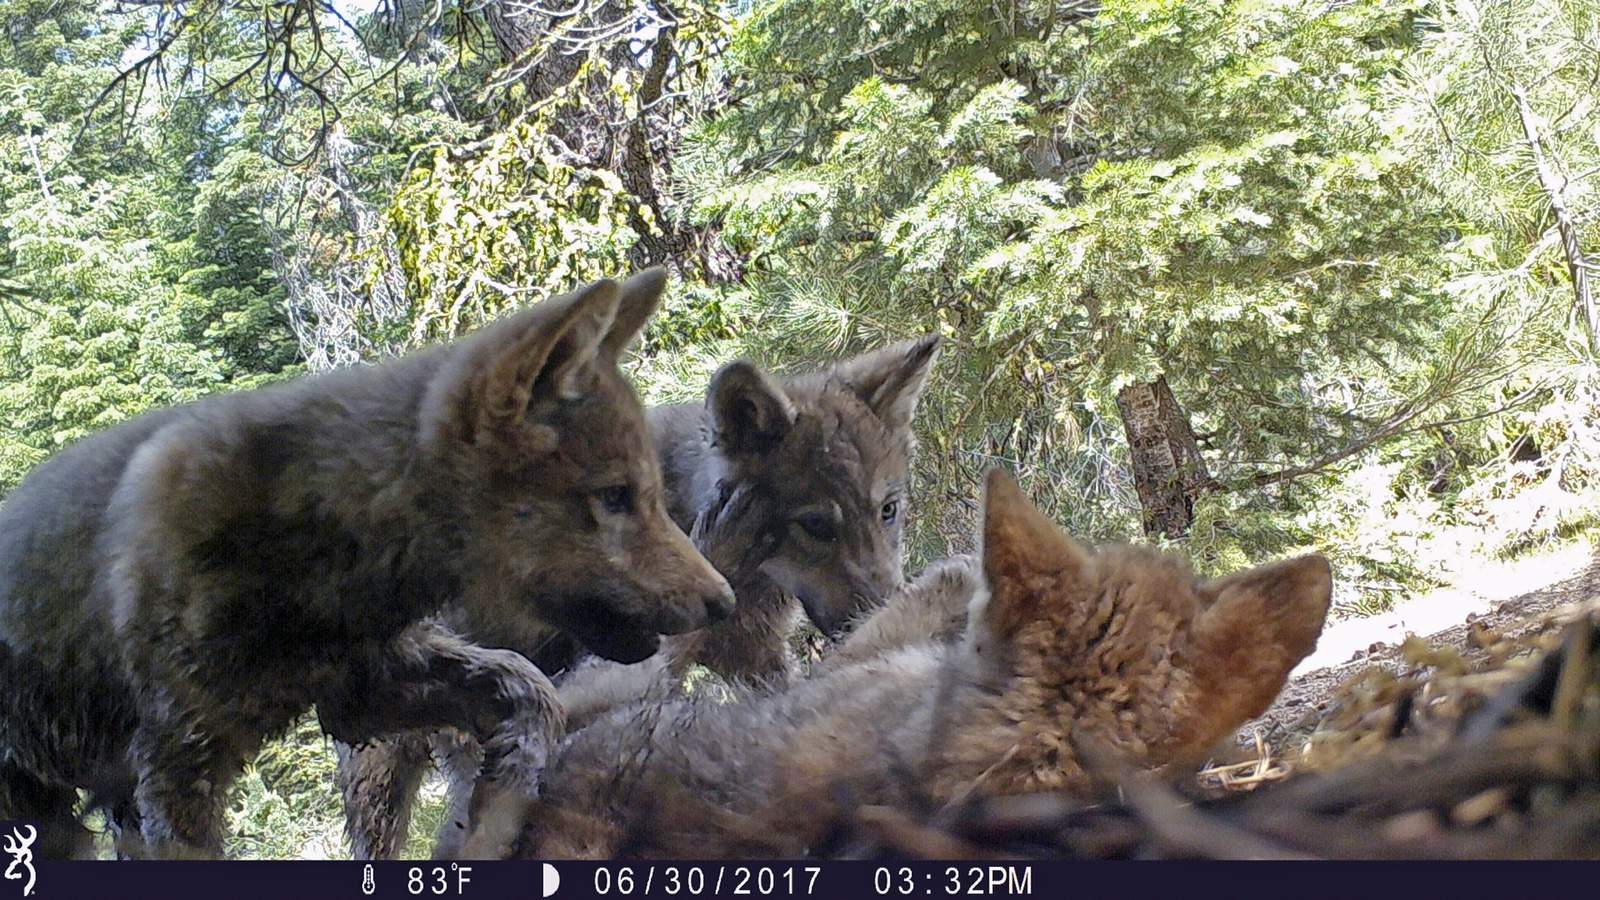 Trump officials end gray wolf protections across most of US